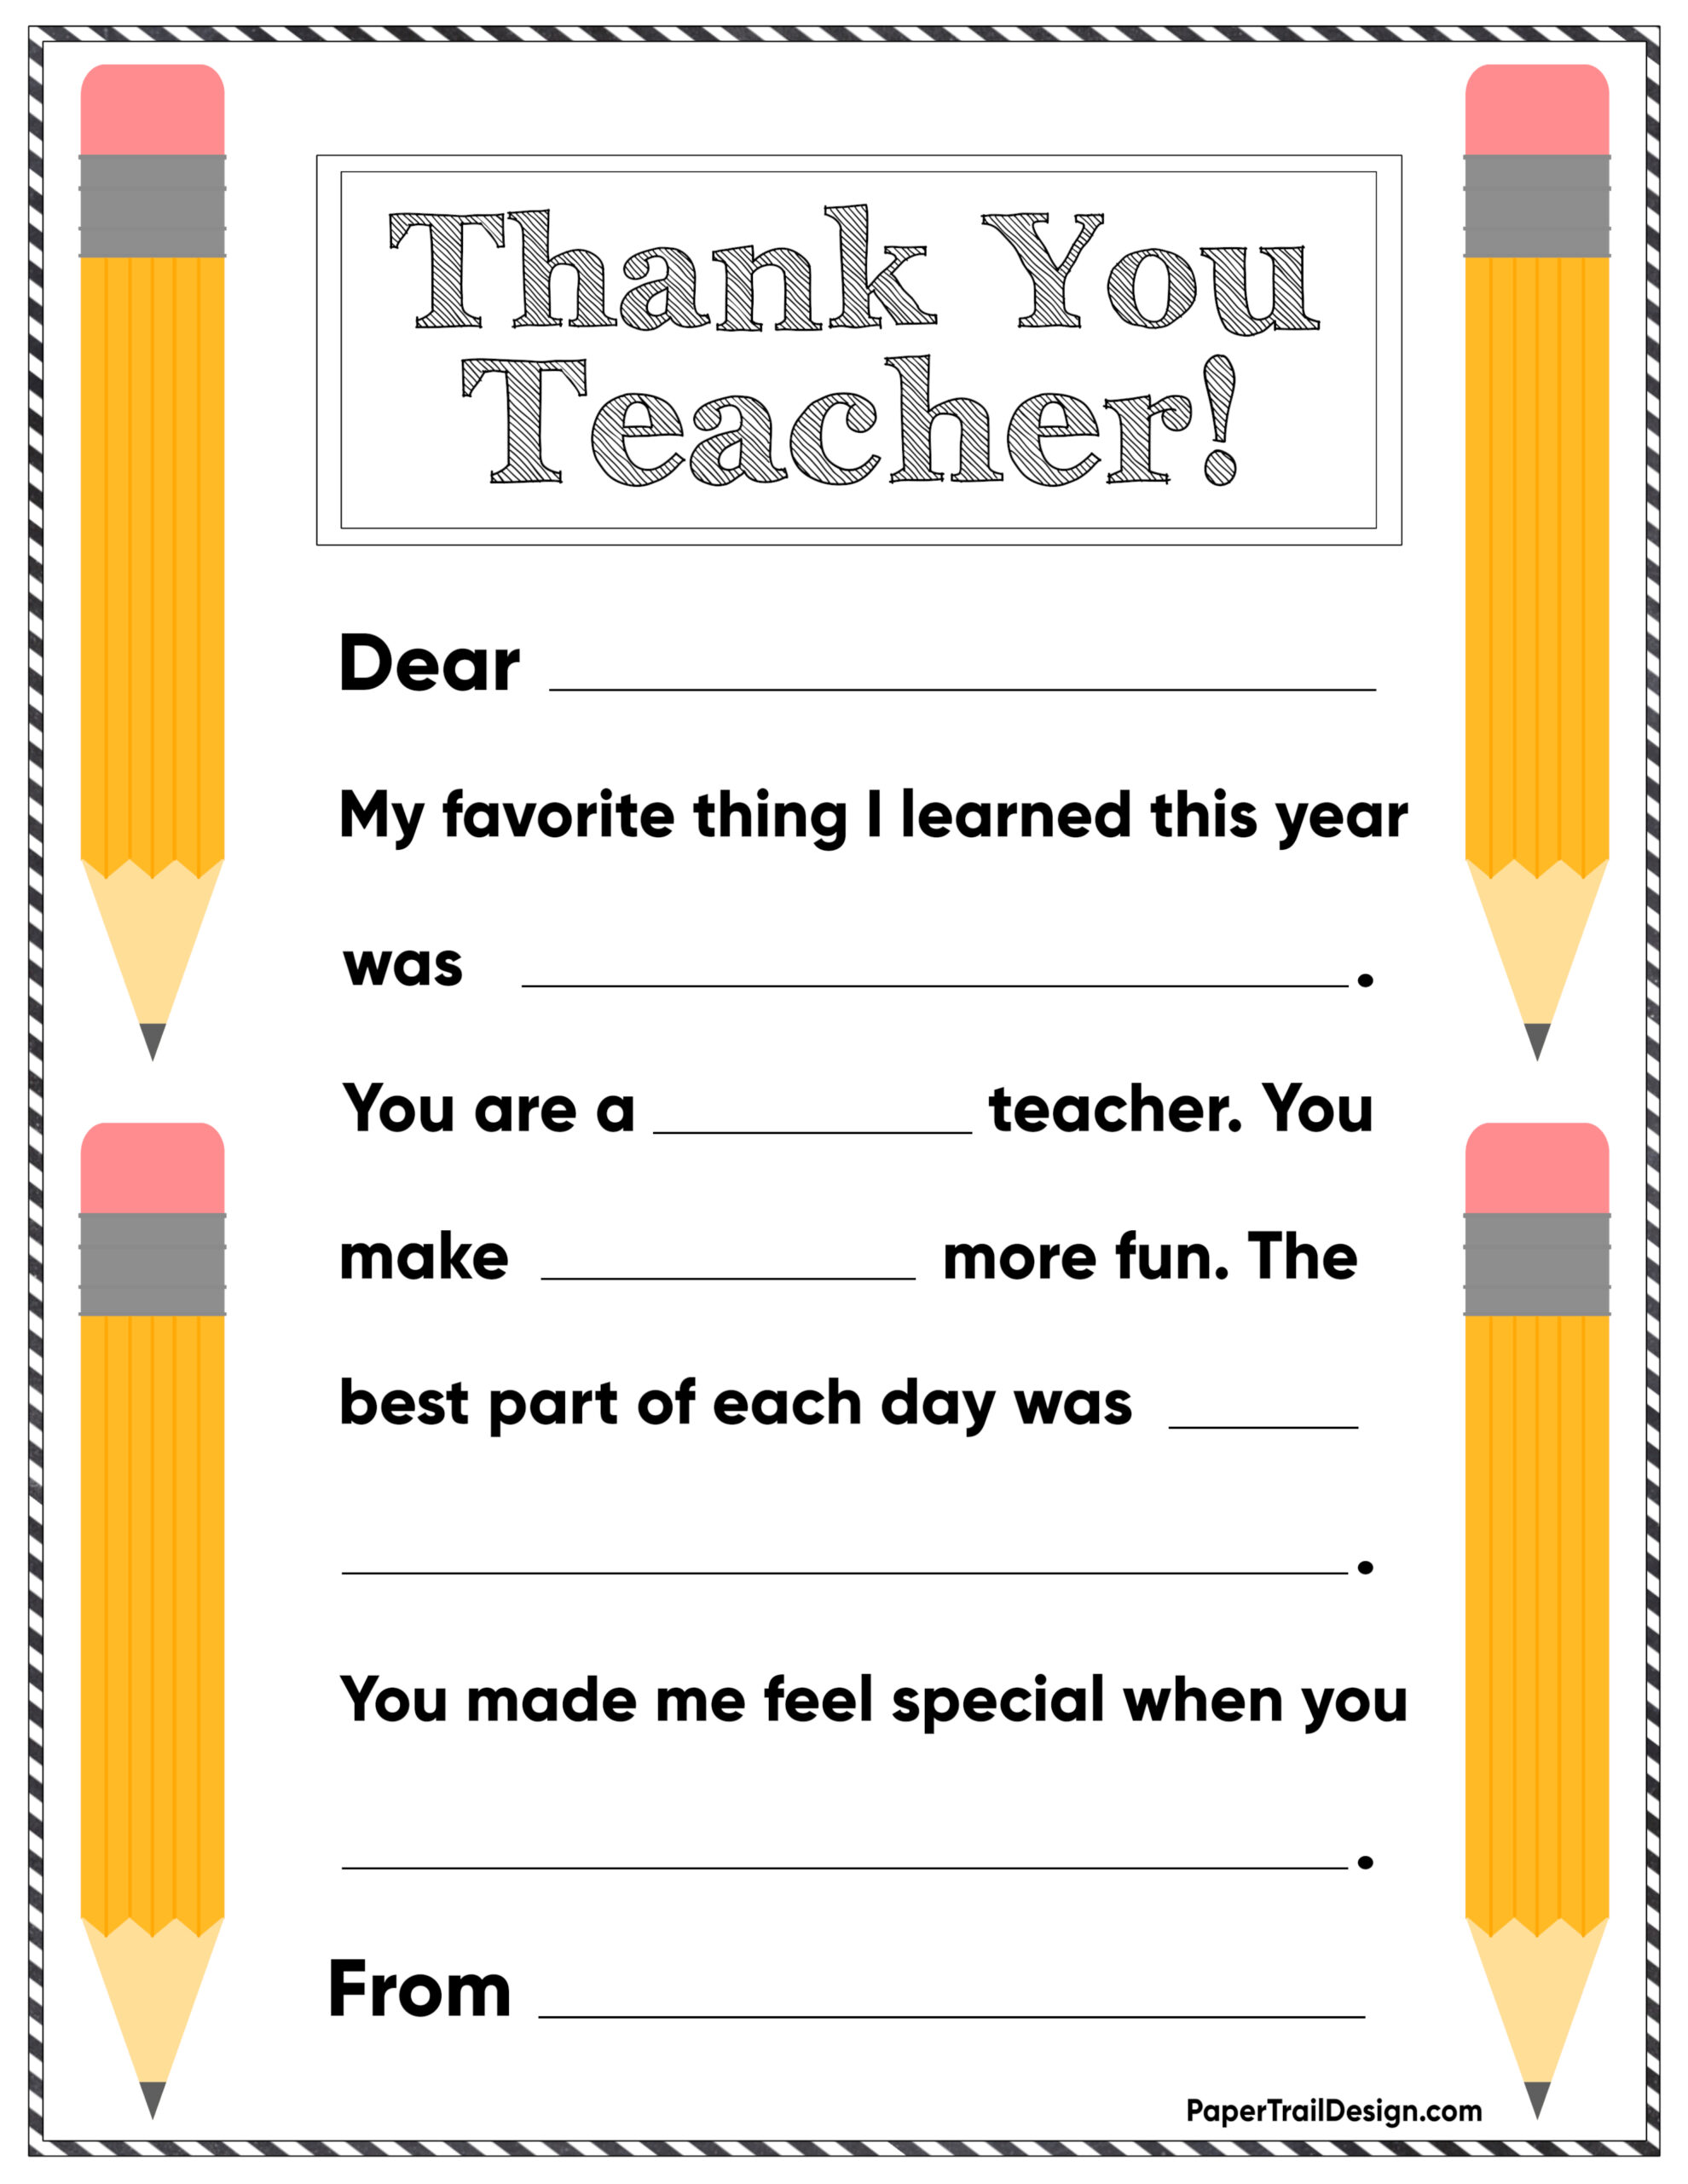 free-online-printable-thank-you-cards-for-teachers-printable-templates